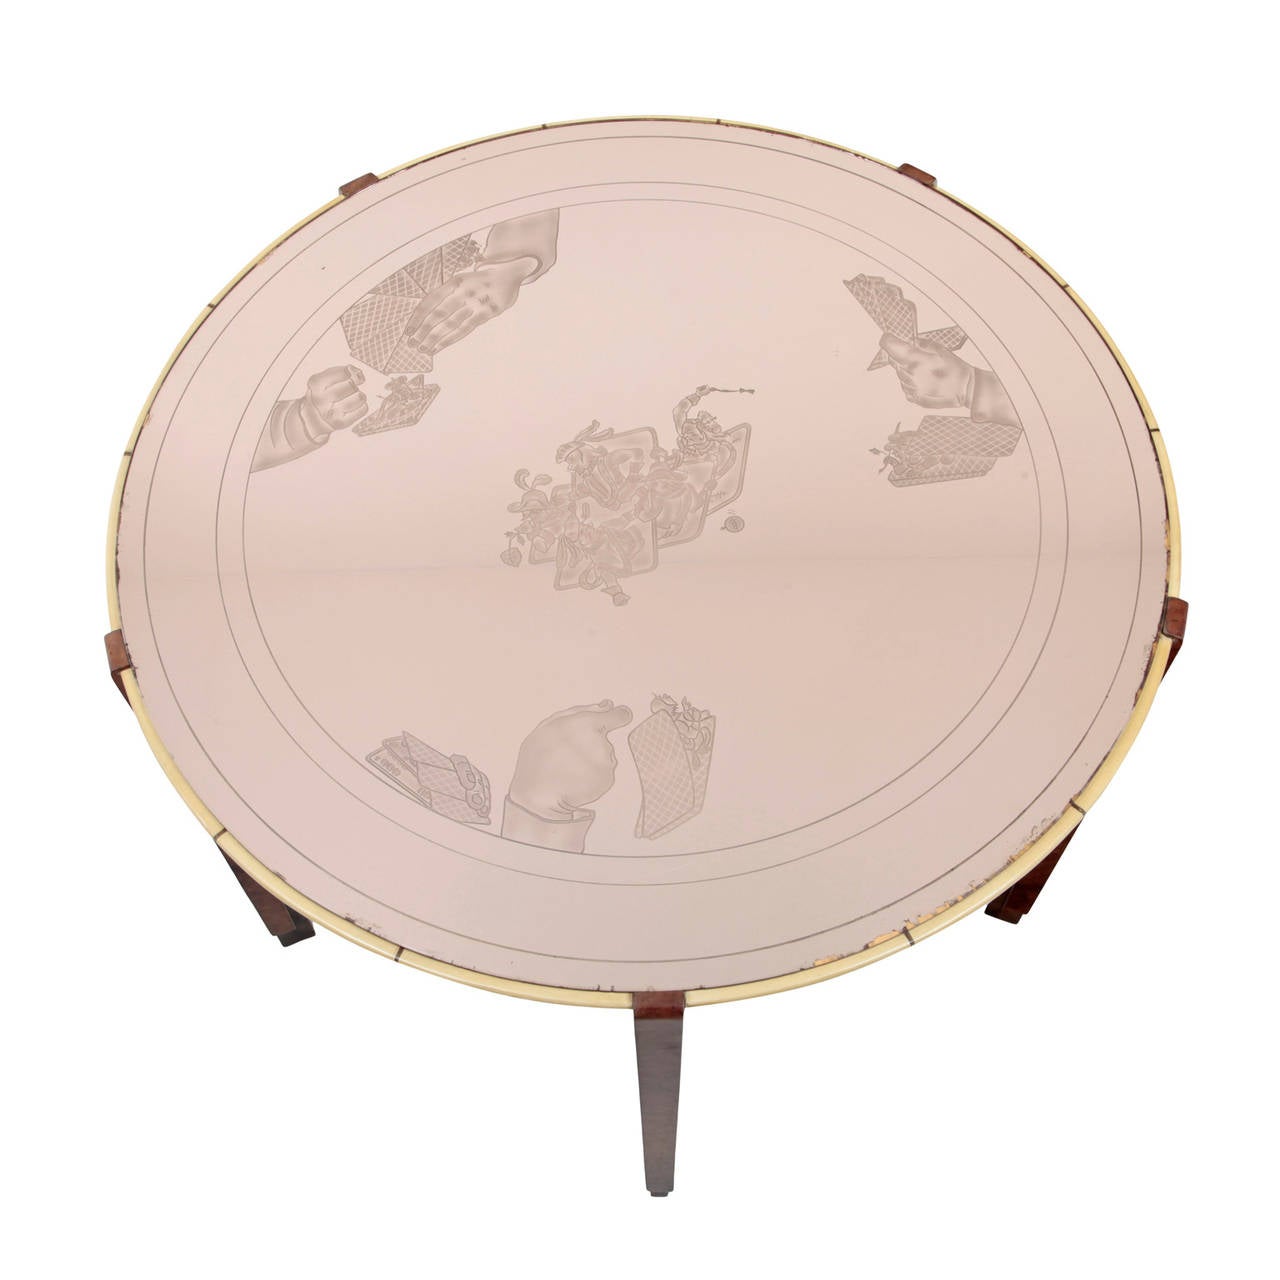 Amazing Game Table by Fontana from 1941. 
The table stands on five straight wooden legs. The round table top has a light beige rim and a rose coloured glass pane. This glass pane is decorated with etched motives of hands that hold playing cards.